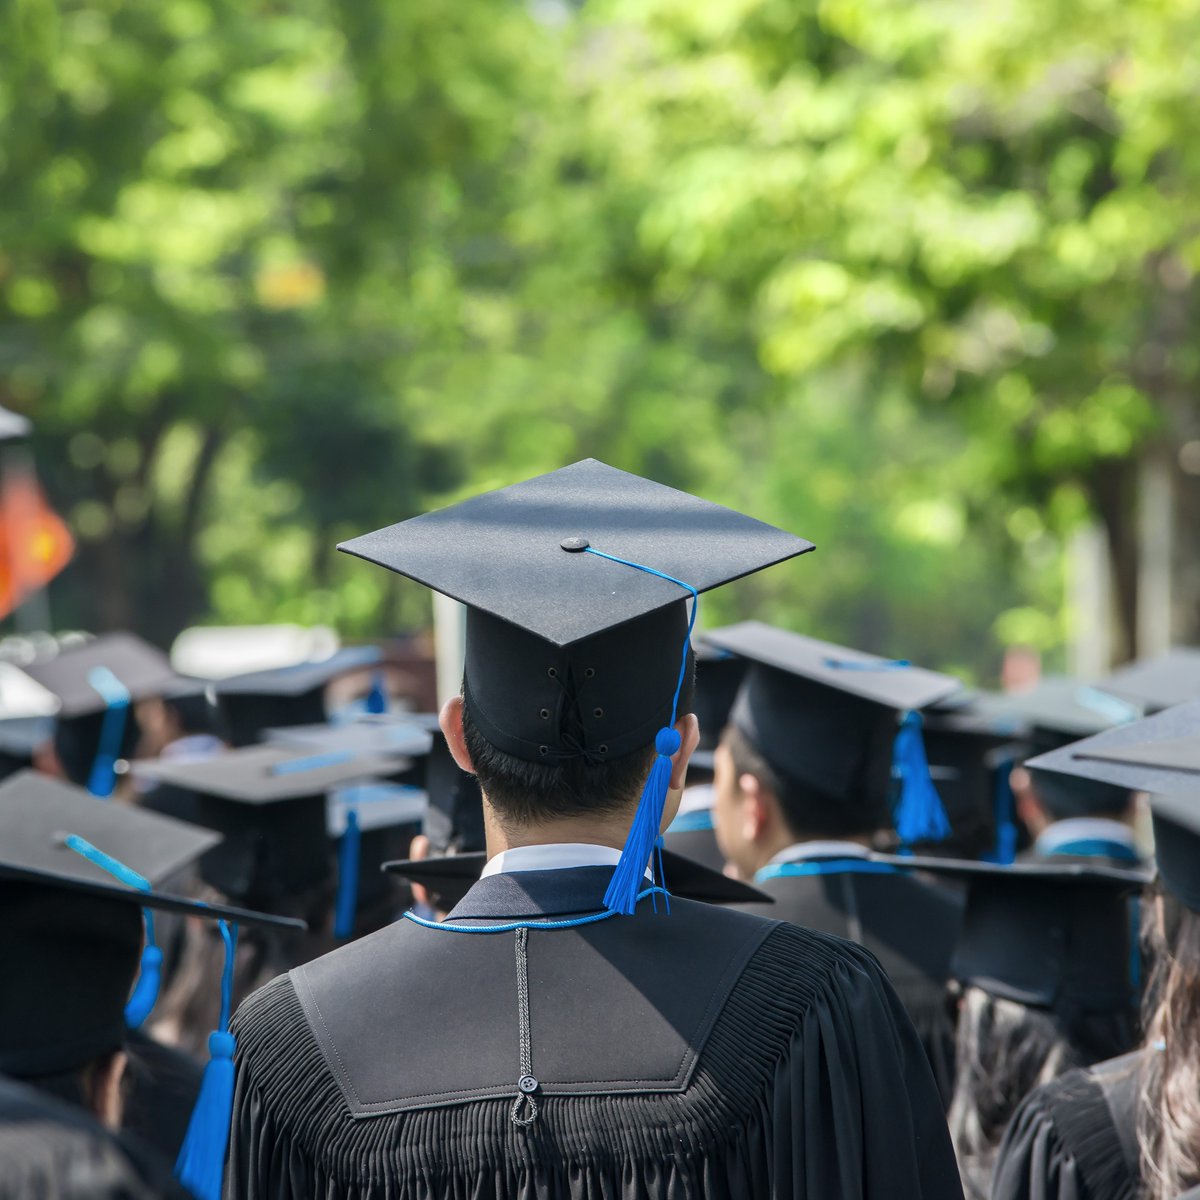 A new analysis of 5.8 million Americans published in @aerj_journal finds that earning a college degree is still a sound investment, although the rate of economic return varies across college majors and student demographics. @Silja10522962 aera.net/Newsroom/Resea…